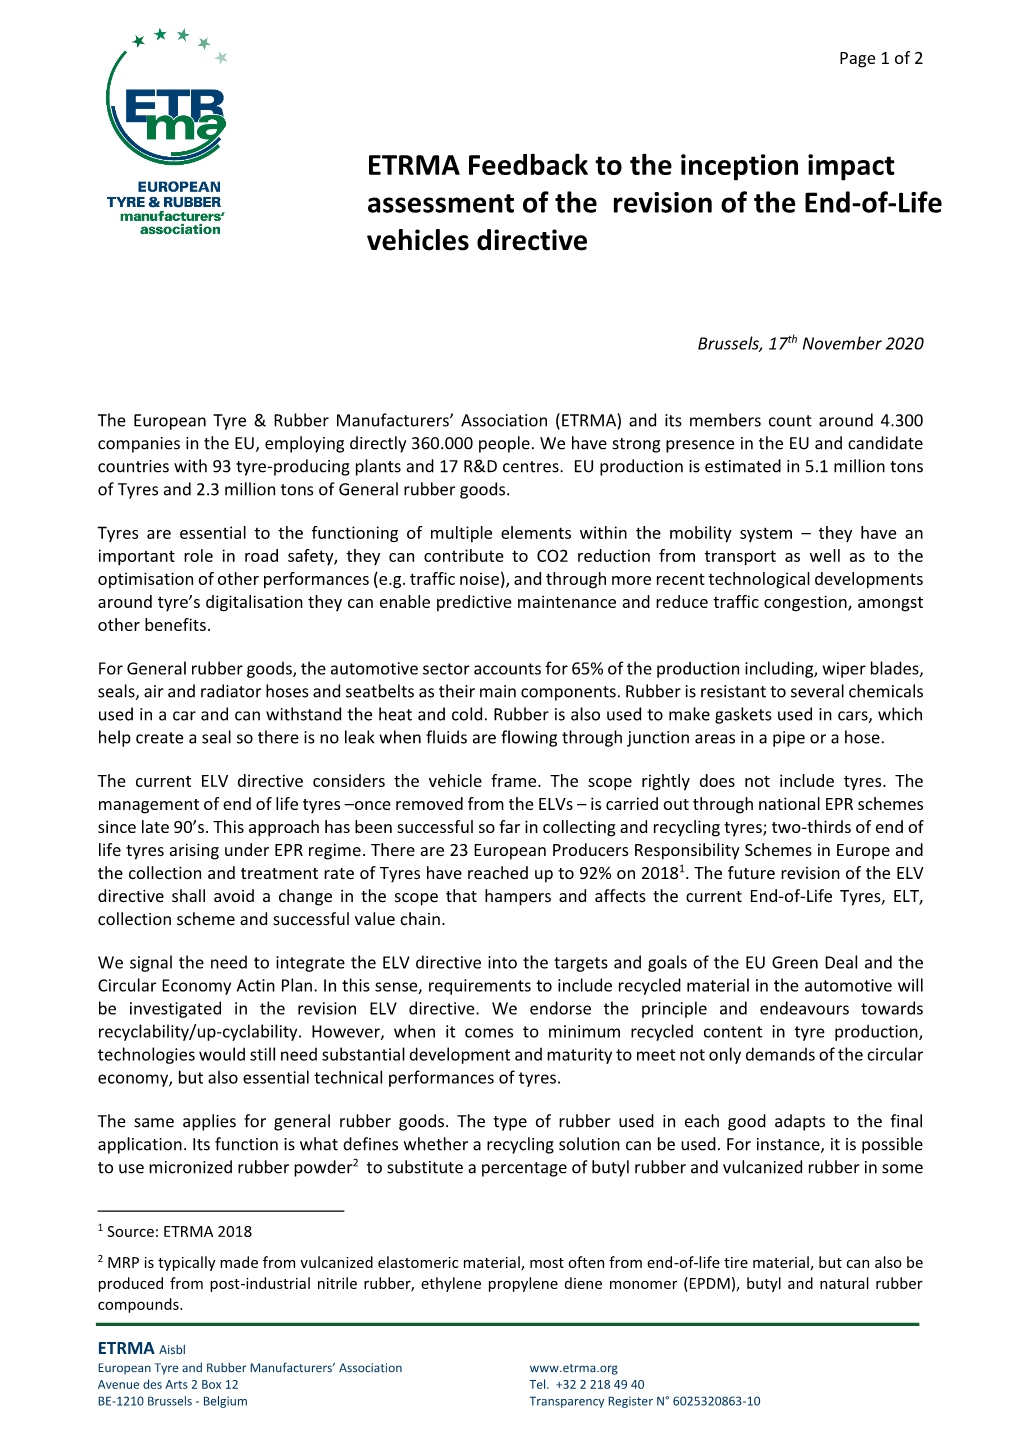 ETRMA Feedback to the Inception Impact Assessment of the Revision of the End-Of-Life Vehicles Directive